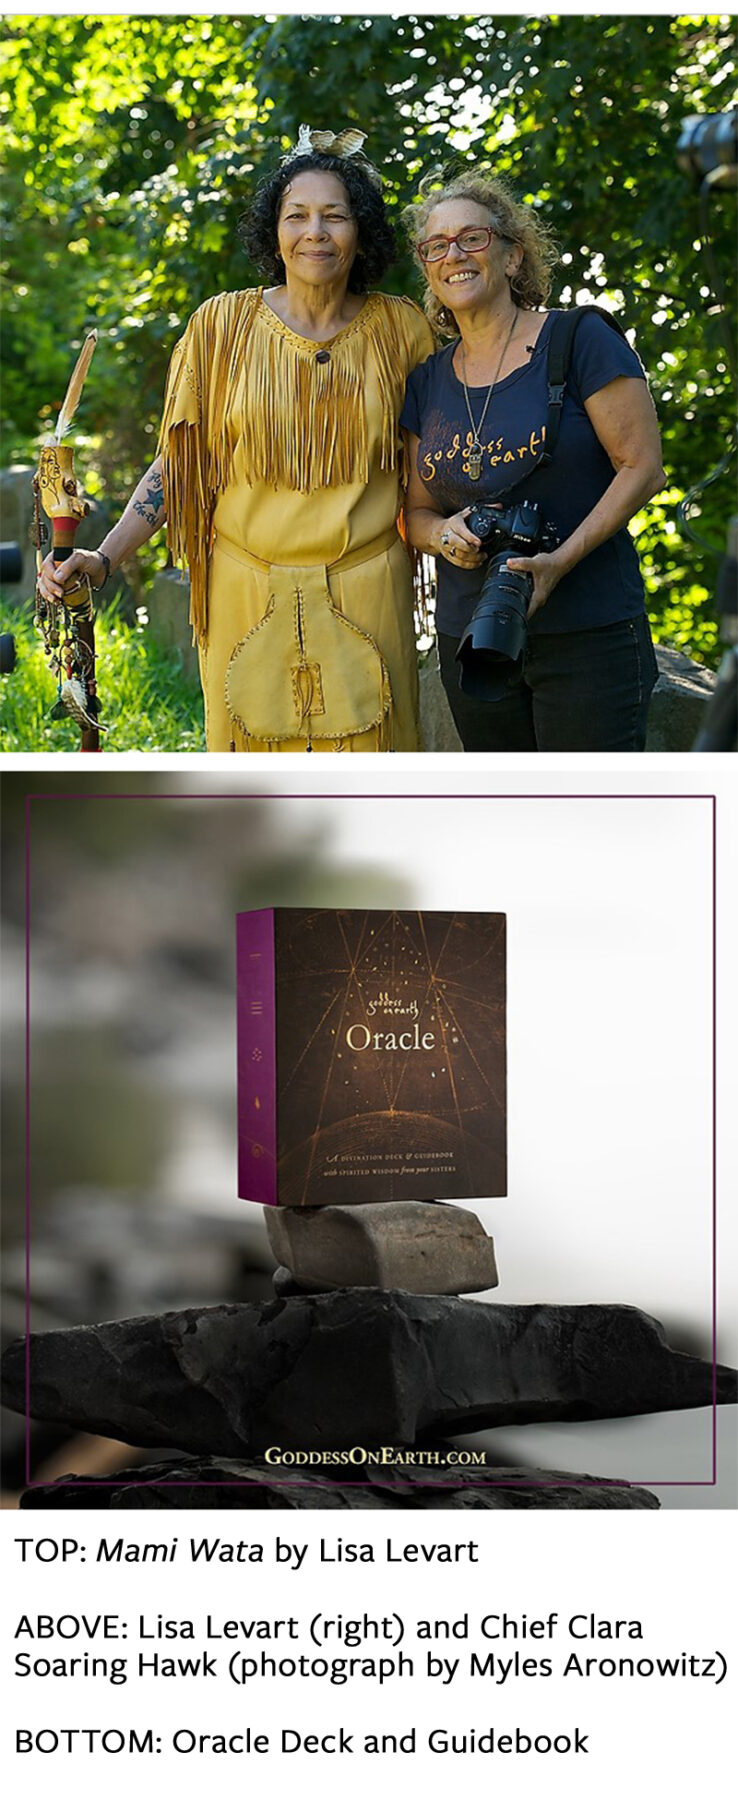 Lisa Levart and Chief Clara Soaring Hawk posing in an outdoor area; product photo of Oracle Deck and Guidebook